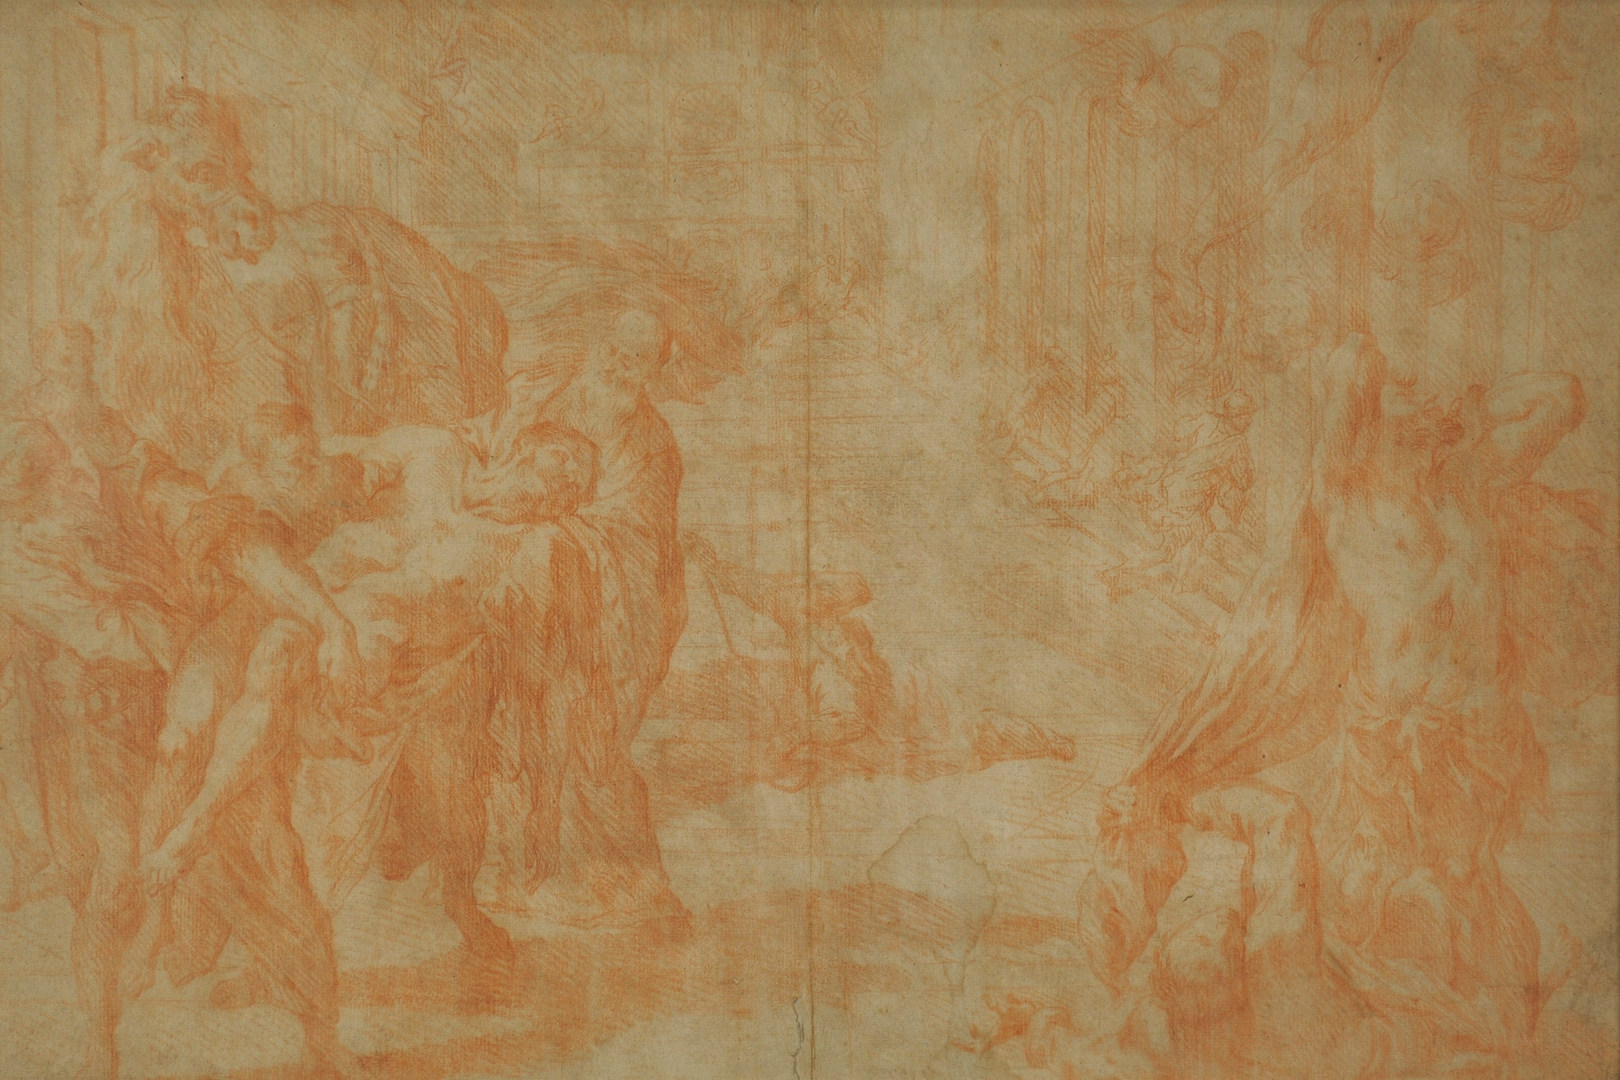 Lot 153: School of Tintoretto Drawing, 17th c.